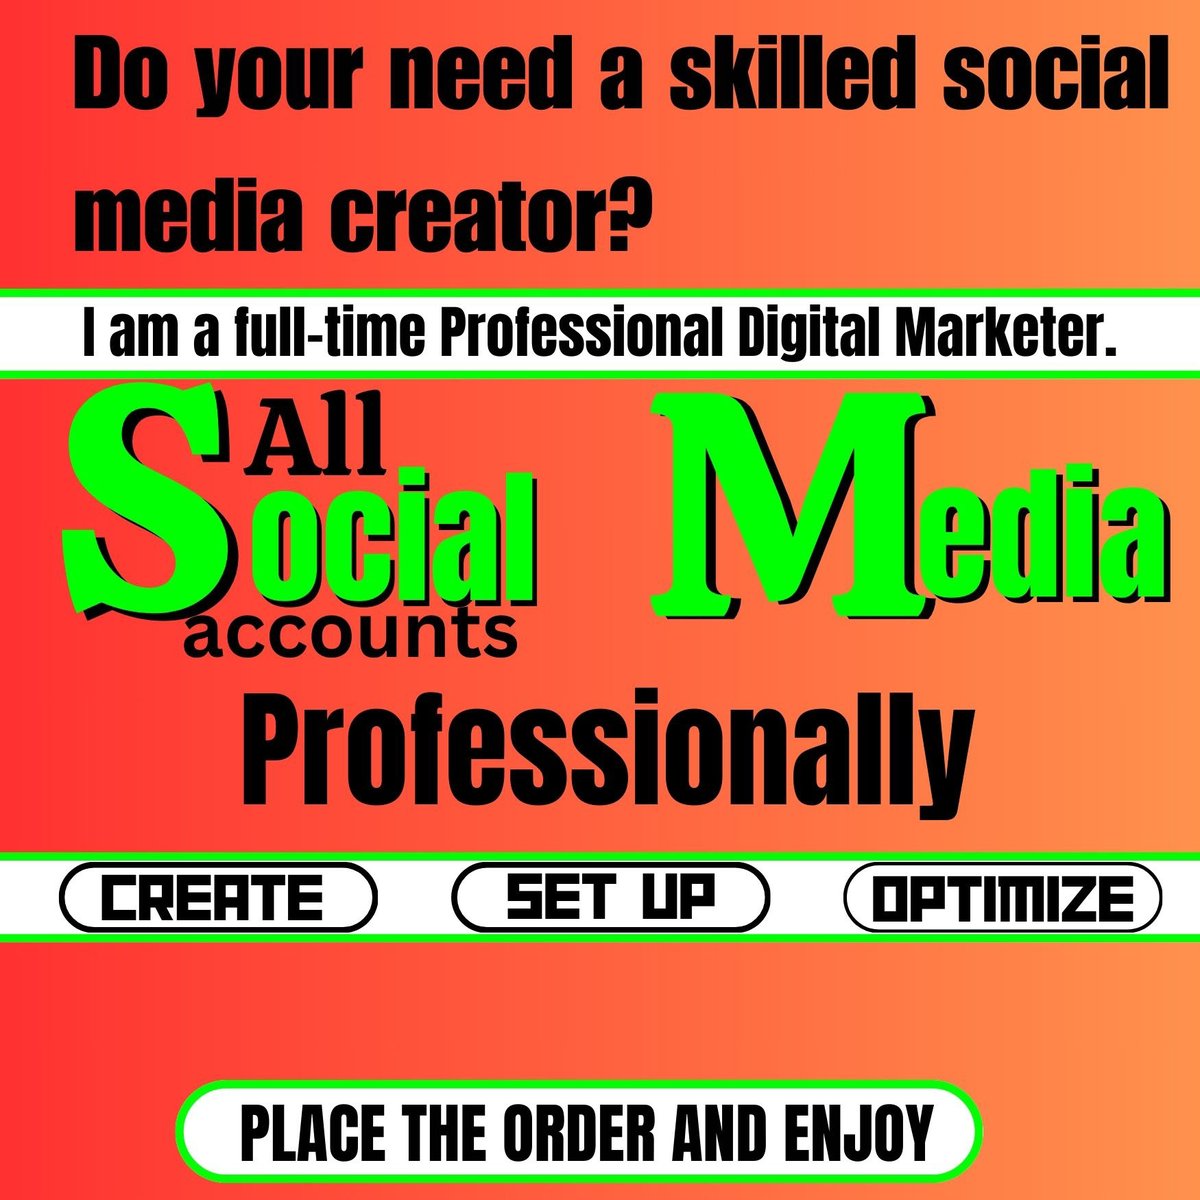 My main goal is to establish myself with perfect service

Click Here 👉fiverr.com/s/Re2P5N

I will create, set up and perfectly optimize all social media accounts and pages
#socialmediaaccounts #socialmedia #socialmediamarketing #digitalmarketing #twitter #socialmediamanager